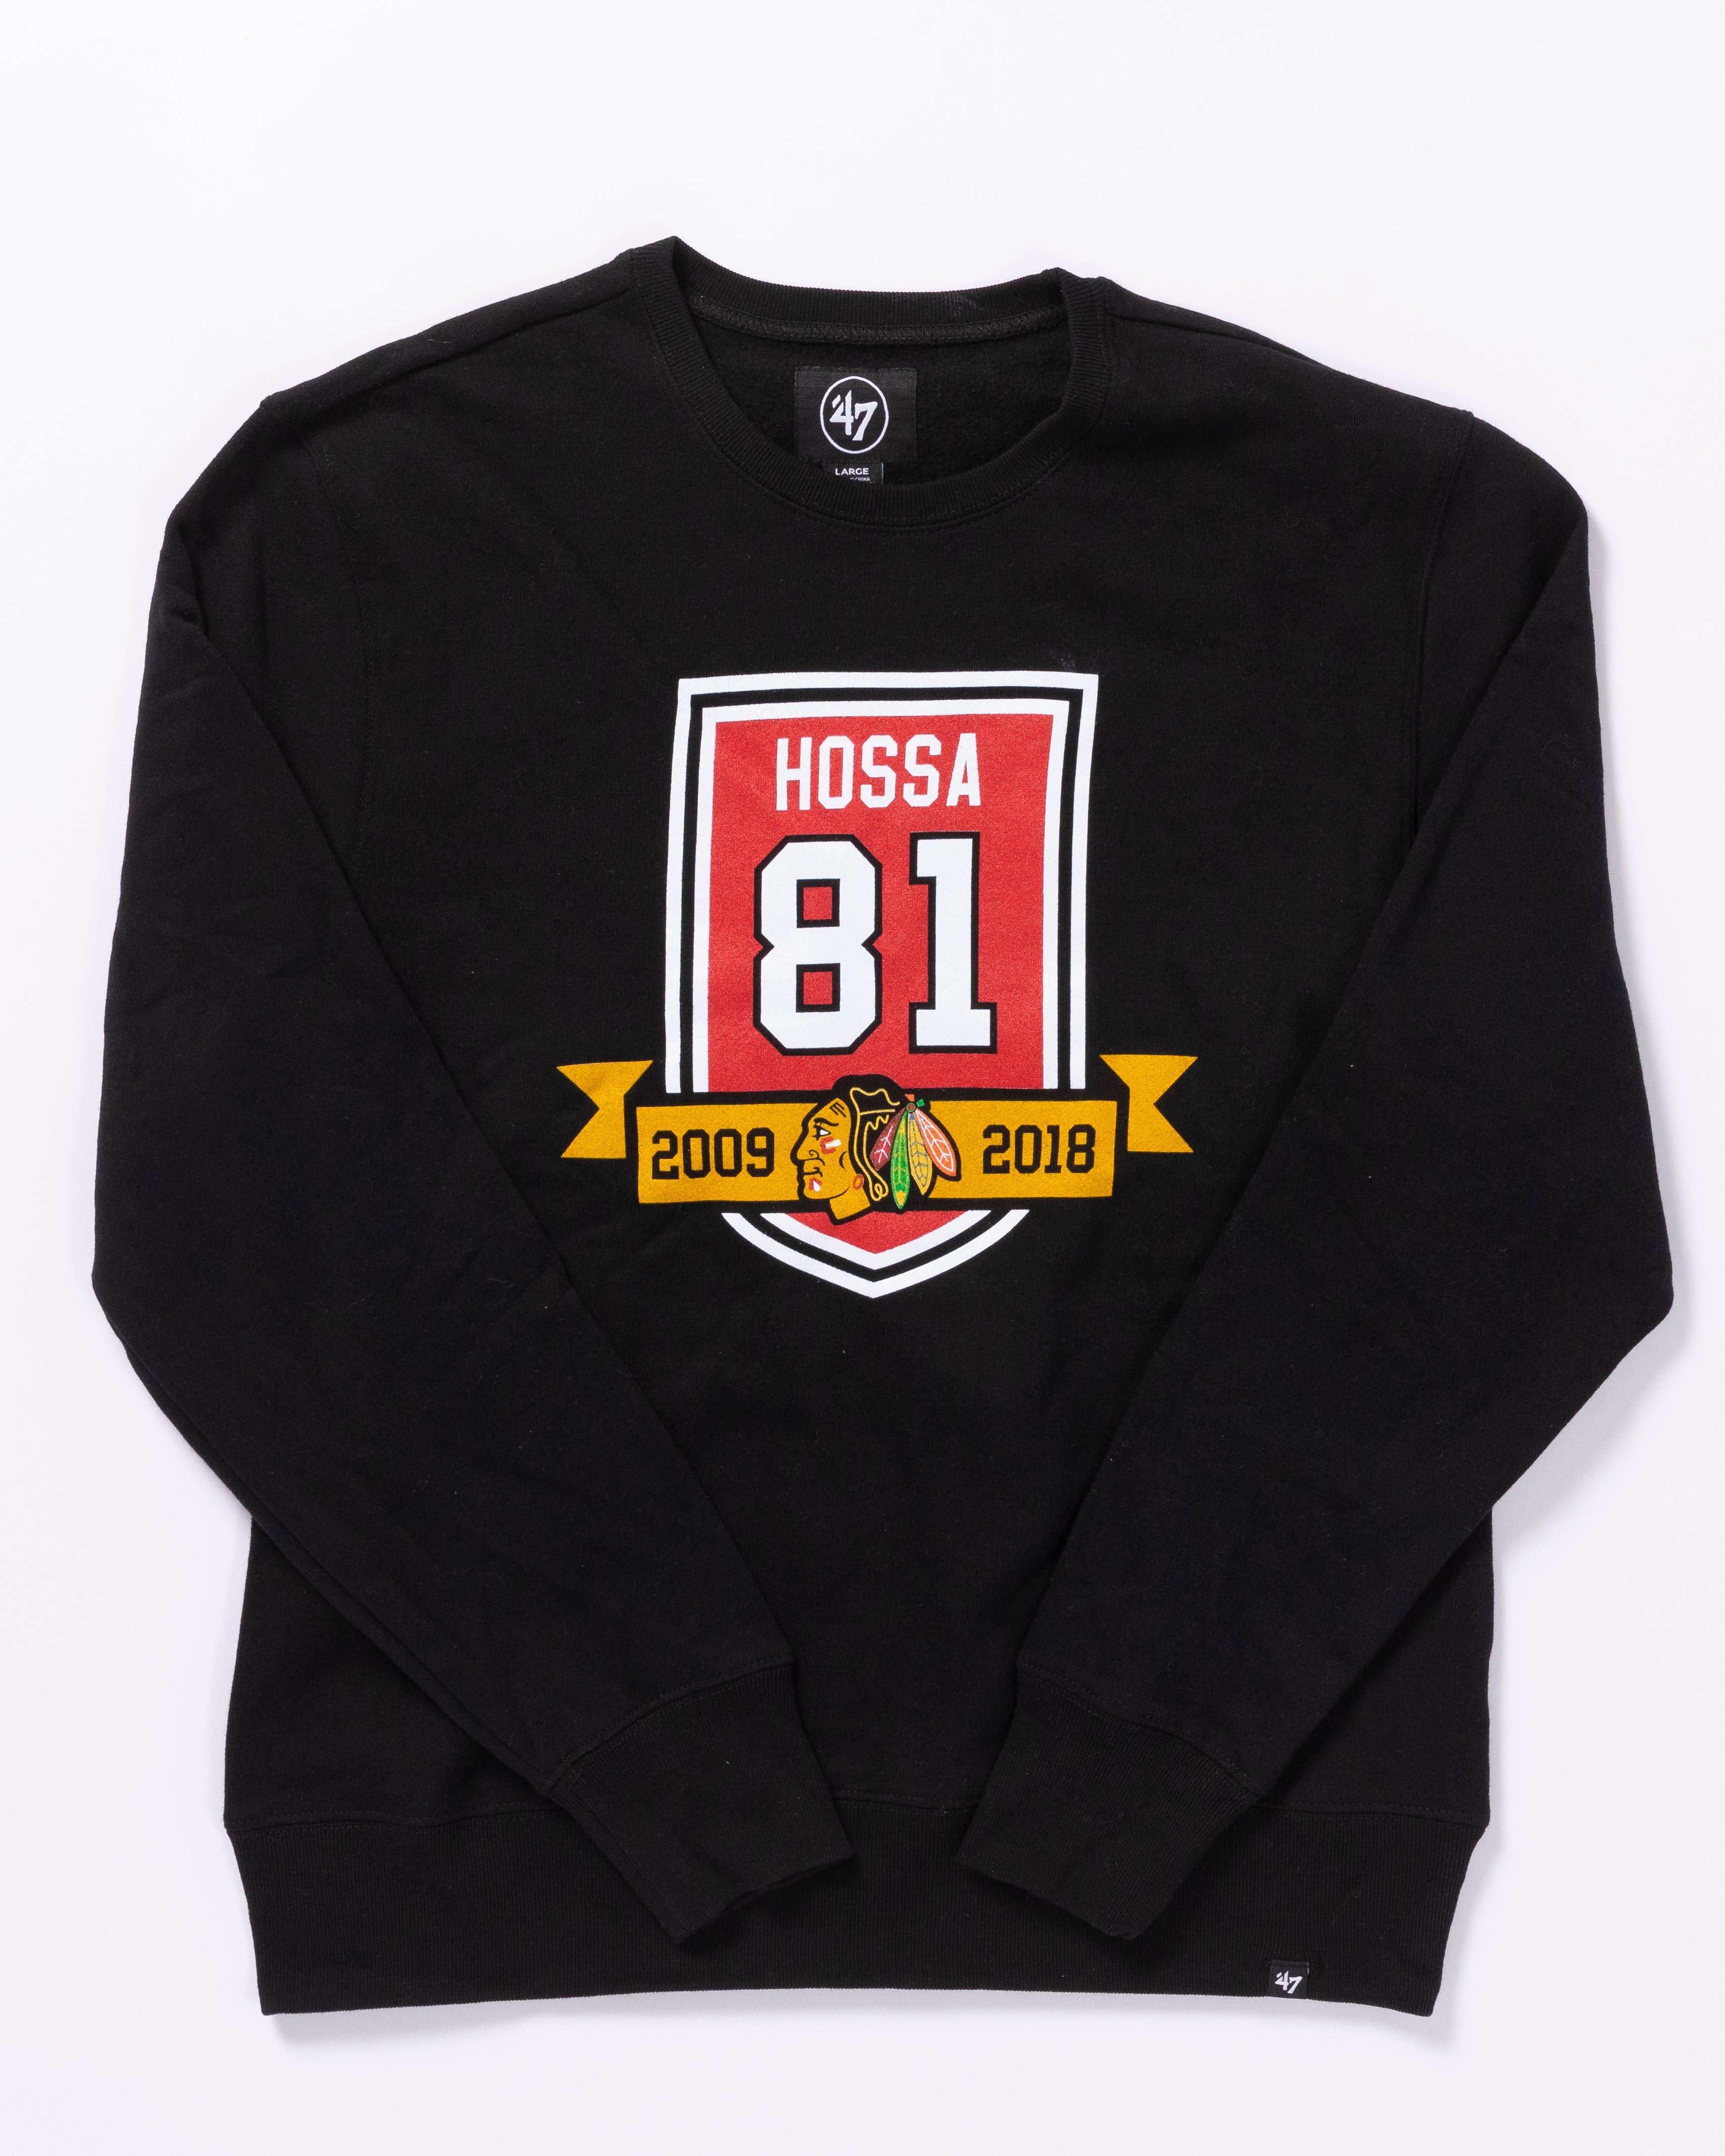 Marian Hossa 81 Chicago Blackhawks thank you for the memories signature  shirt, hoodie, sweater, long sleeve and tank top